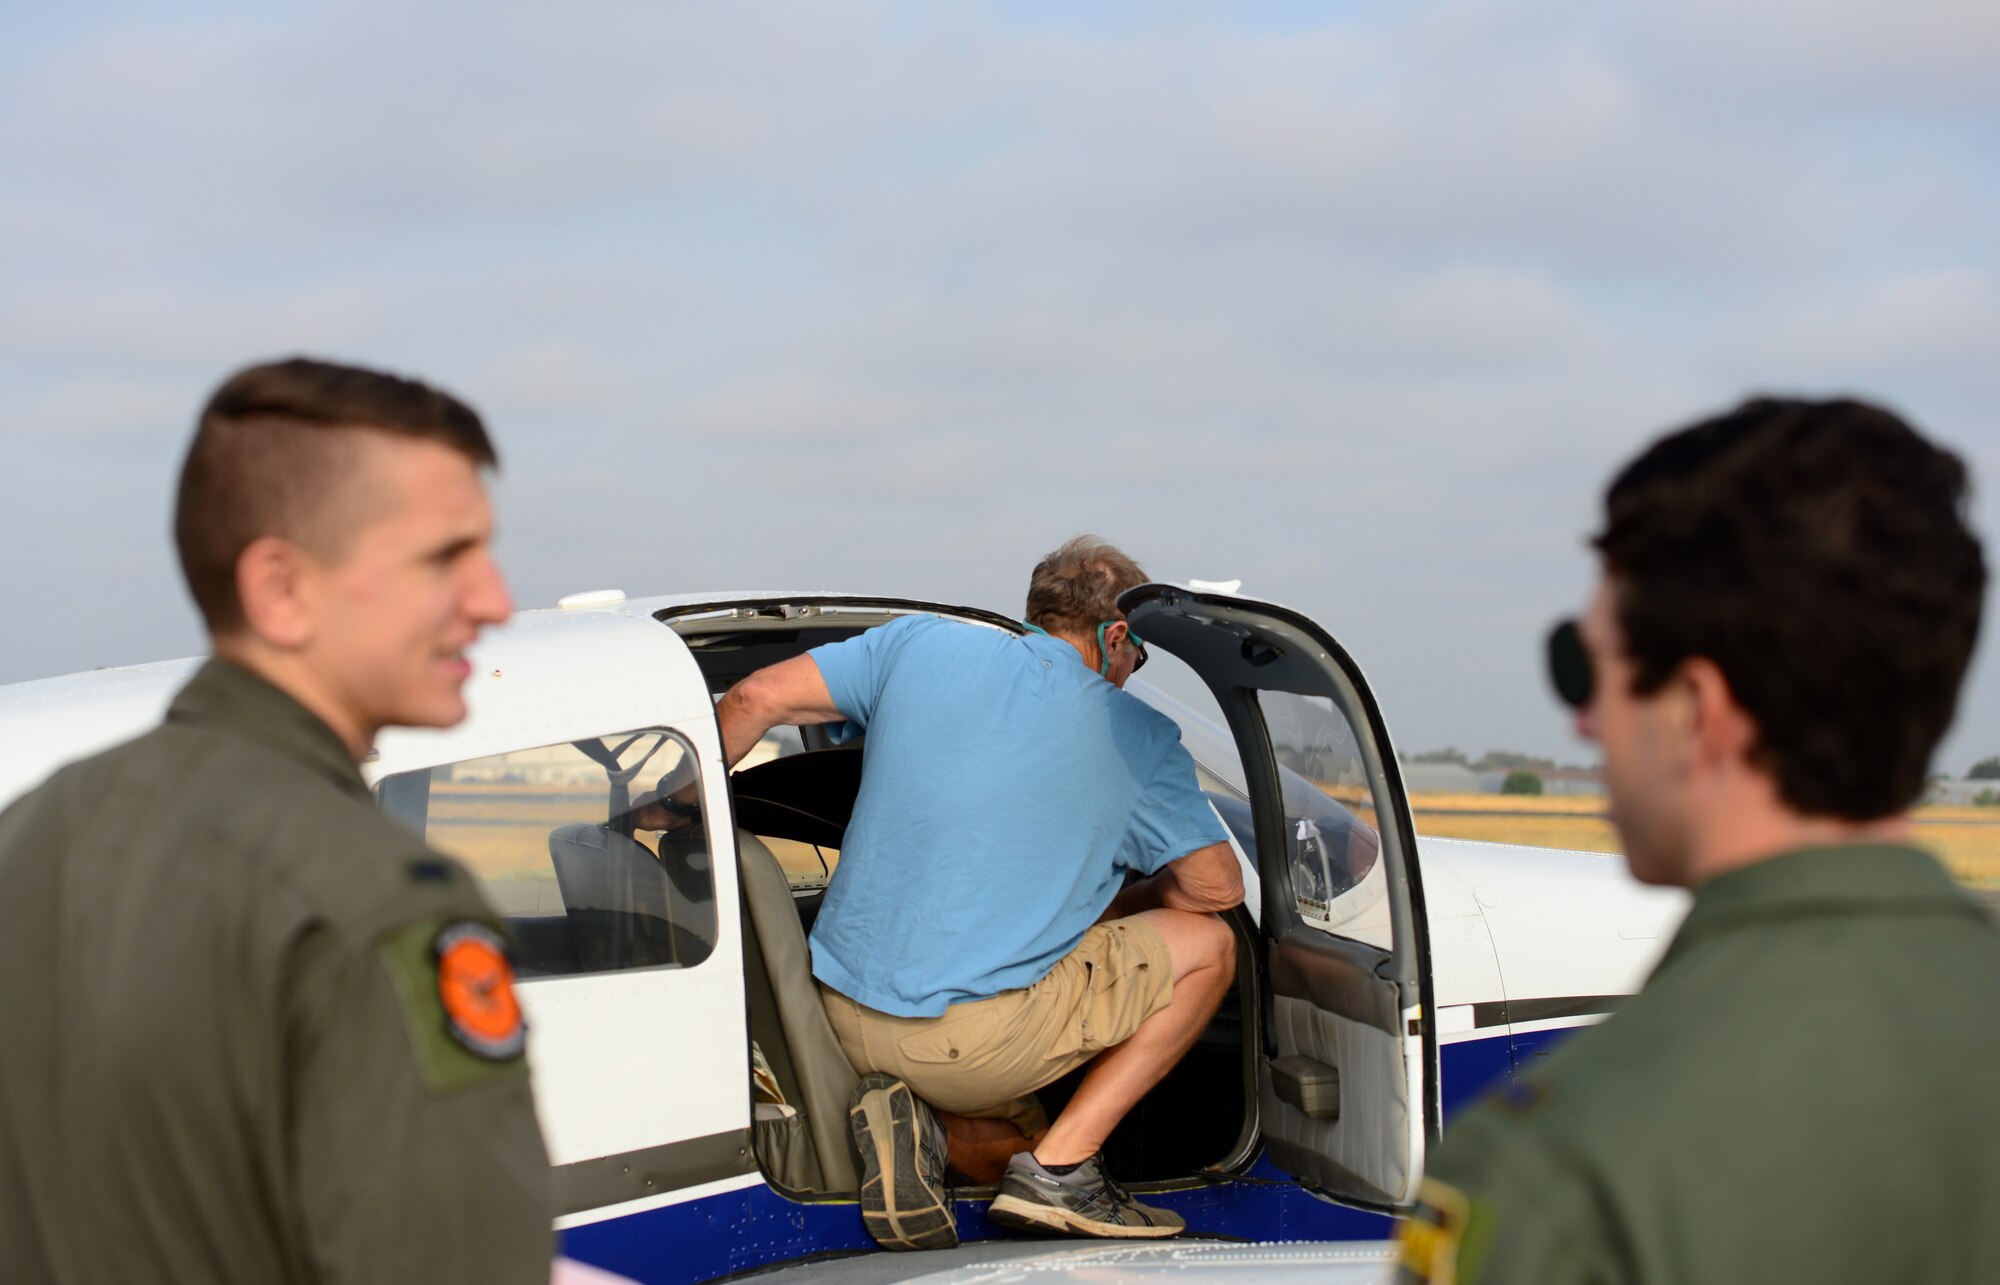 The 12th Reconnaissance Squadron began a Companion Trainer Program (CTP) at the Yuba County Airport in Olivehurst, California Aug. 27, 2018.